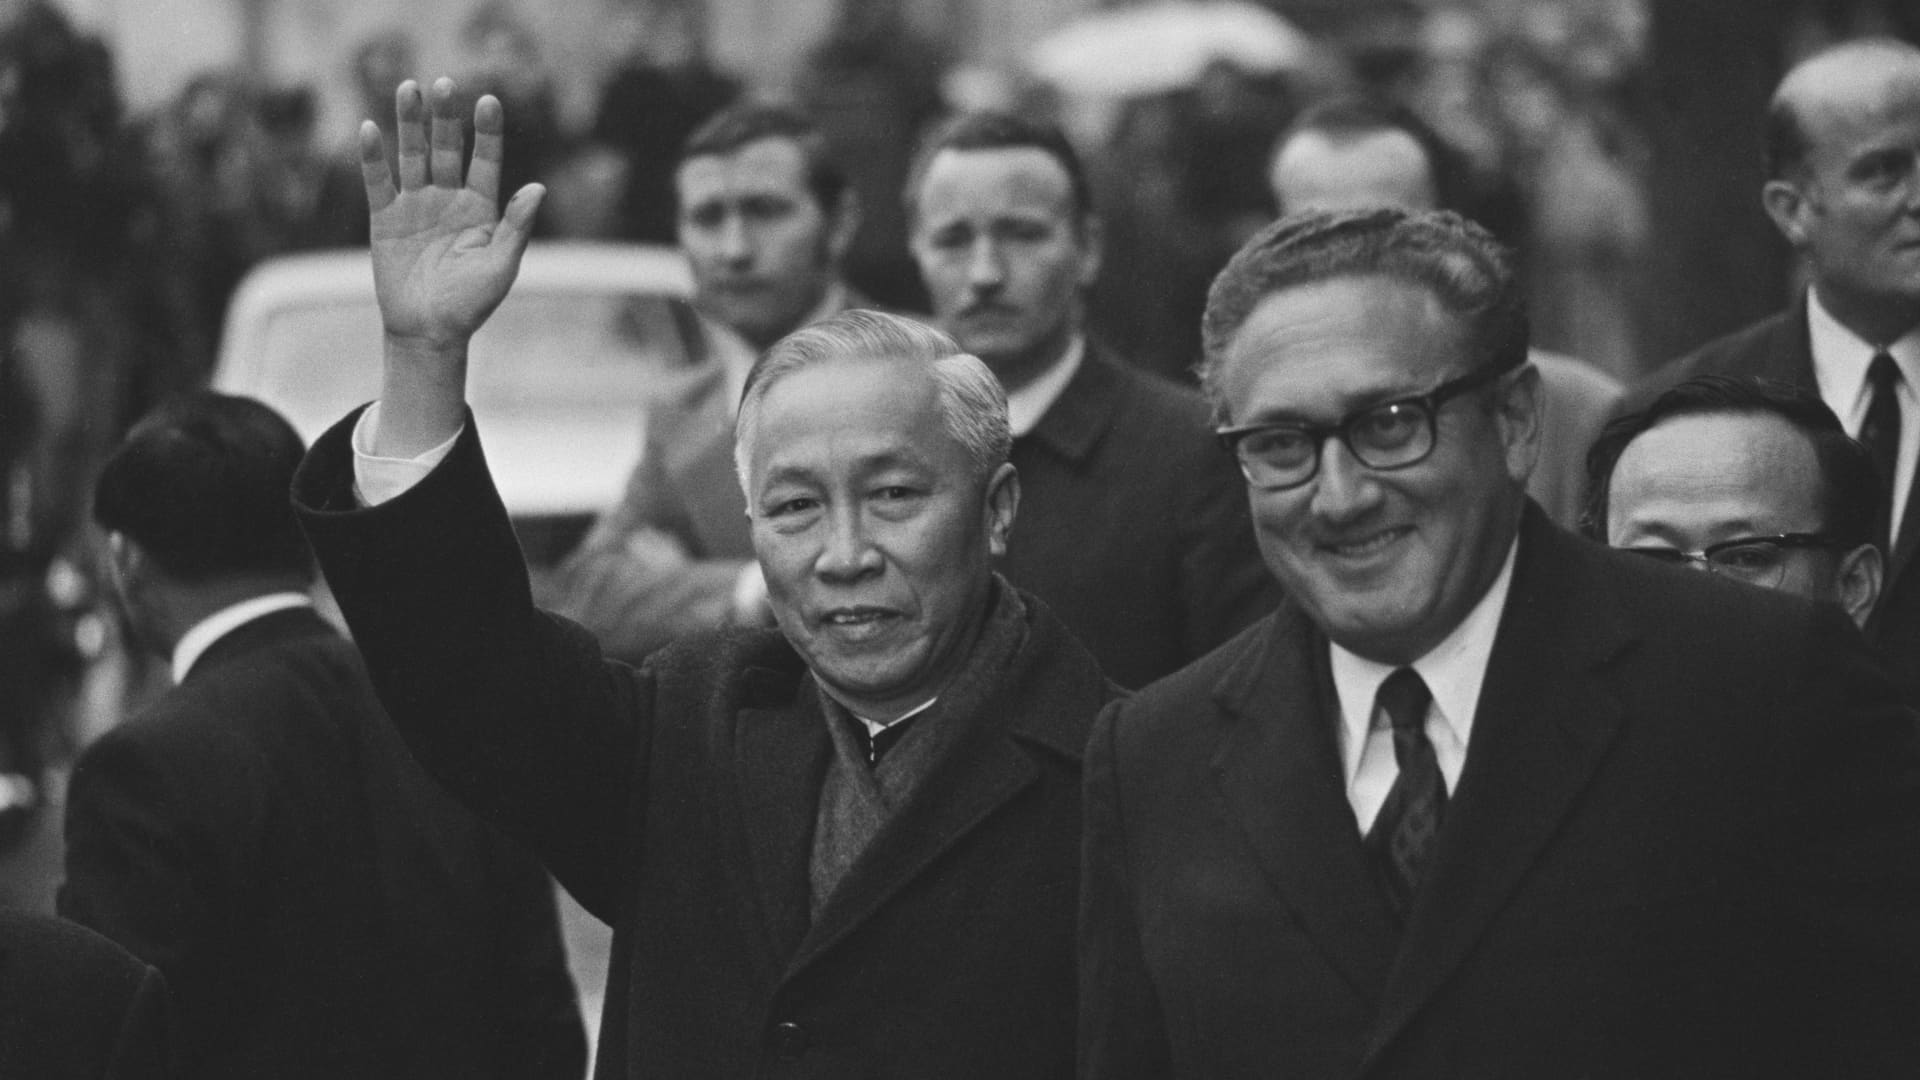 North Vietnam's Le Duc Tho (left) and US National Security Advisor Henry Kissinger at the Paris peace talks, January 1973. They were jointly awarded the 1973 Nobel Peace Prize later that year.